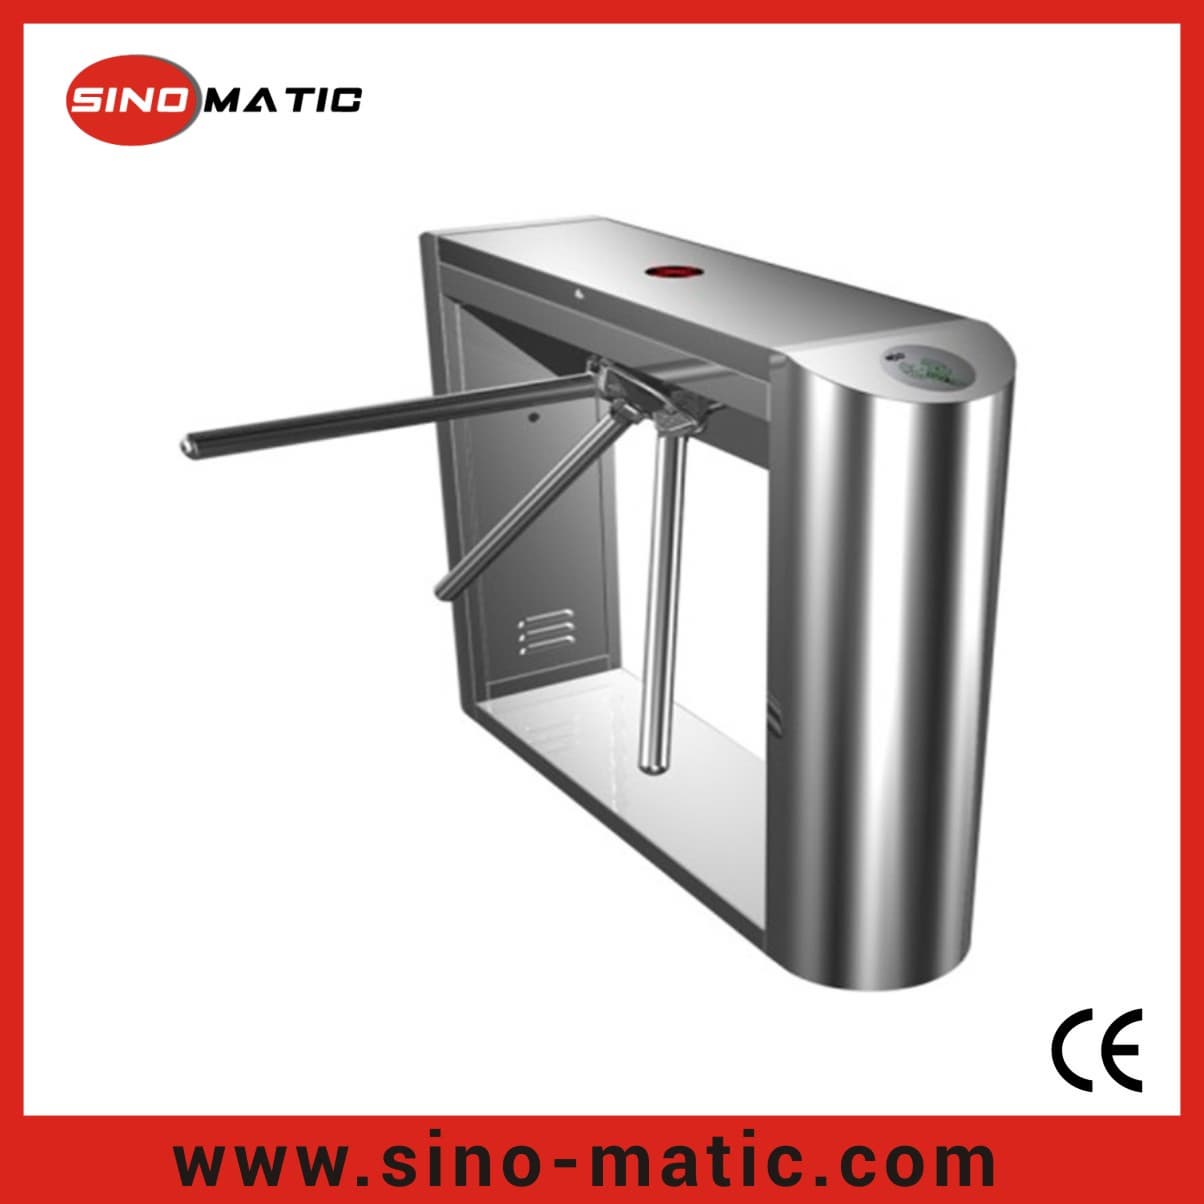 Rotary access control system turnstile gate